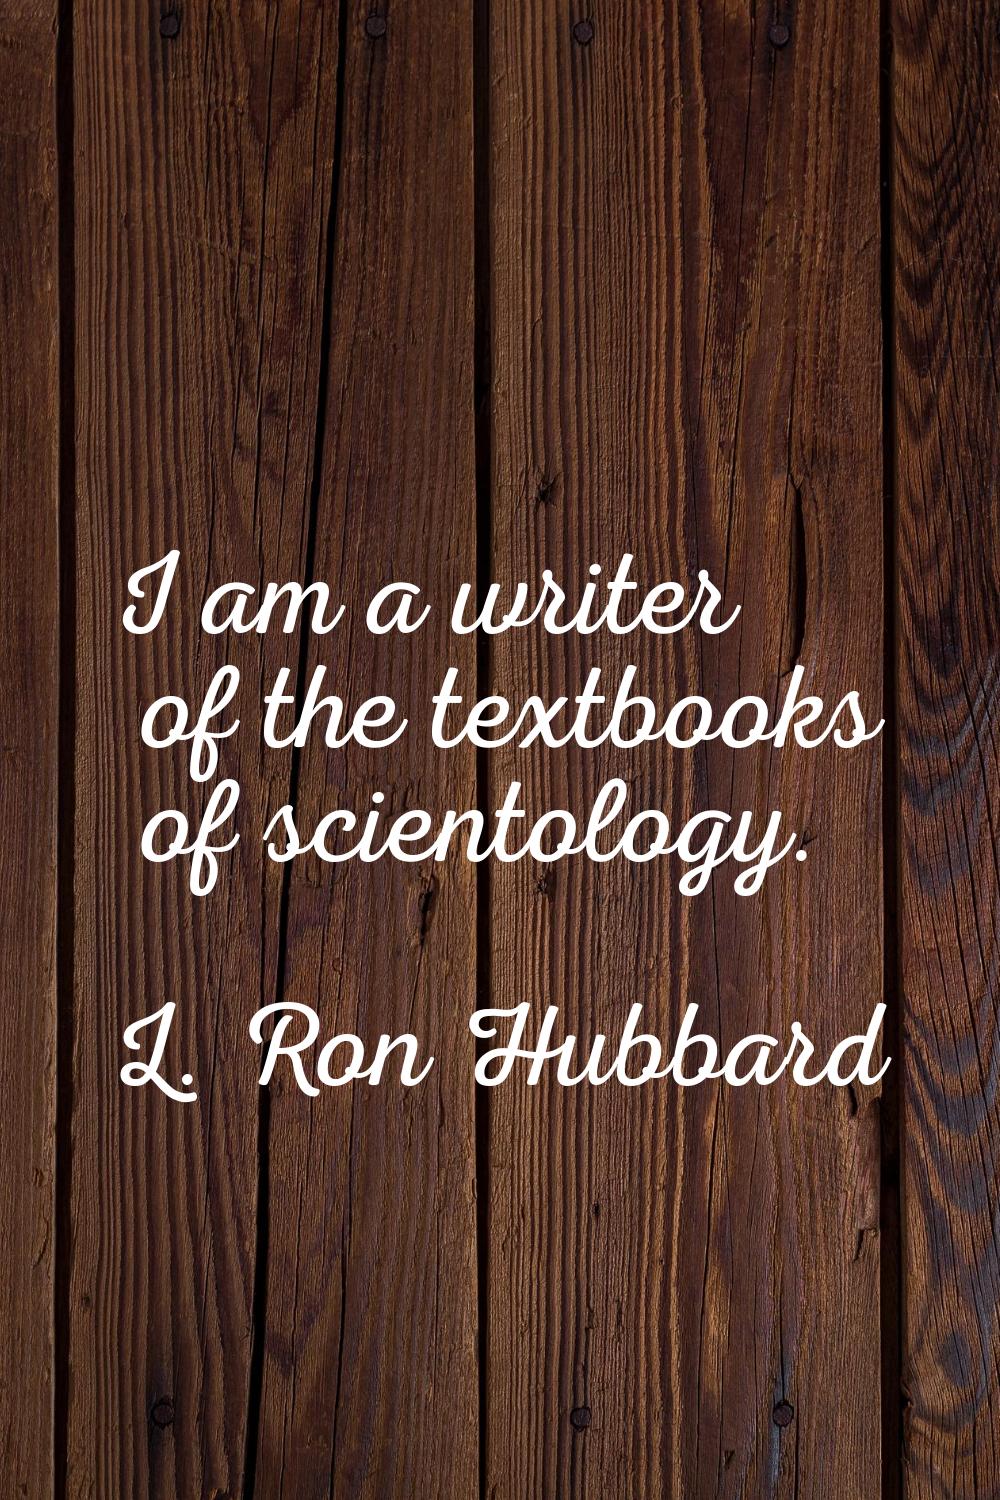 I am a writer of the textbooks of scientology.